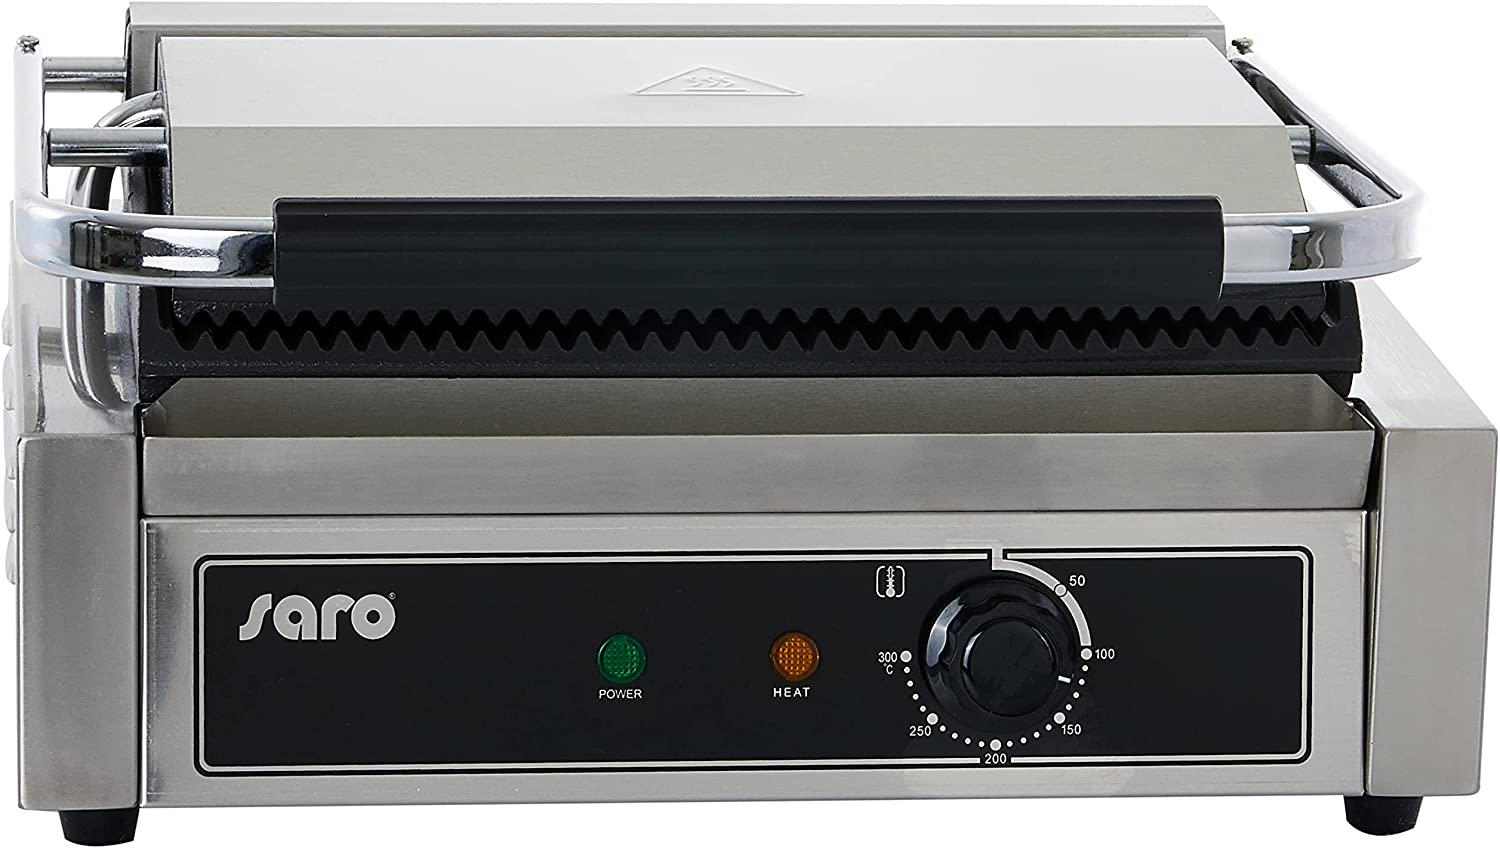 Saro Electric Contact Grill Model PG 1B Professional Grill Plate Table Grill (Electric Grill, Extra Wide, Grooved on Both Sides, Roasting e.g. Steaks, Non-Stick 300°, Catering, Stainless Steel, Cast Iron) Silver